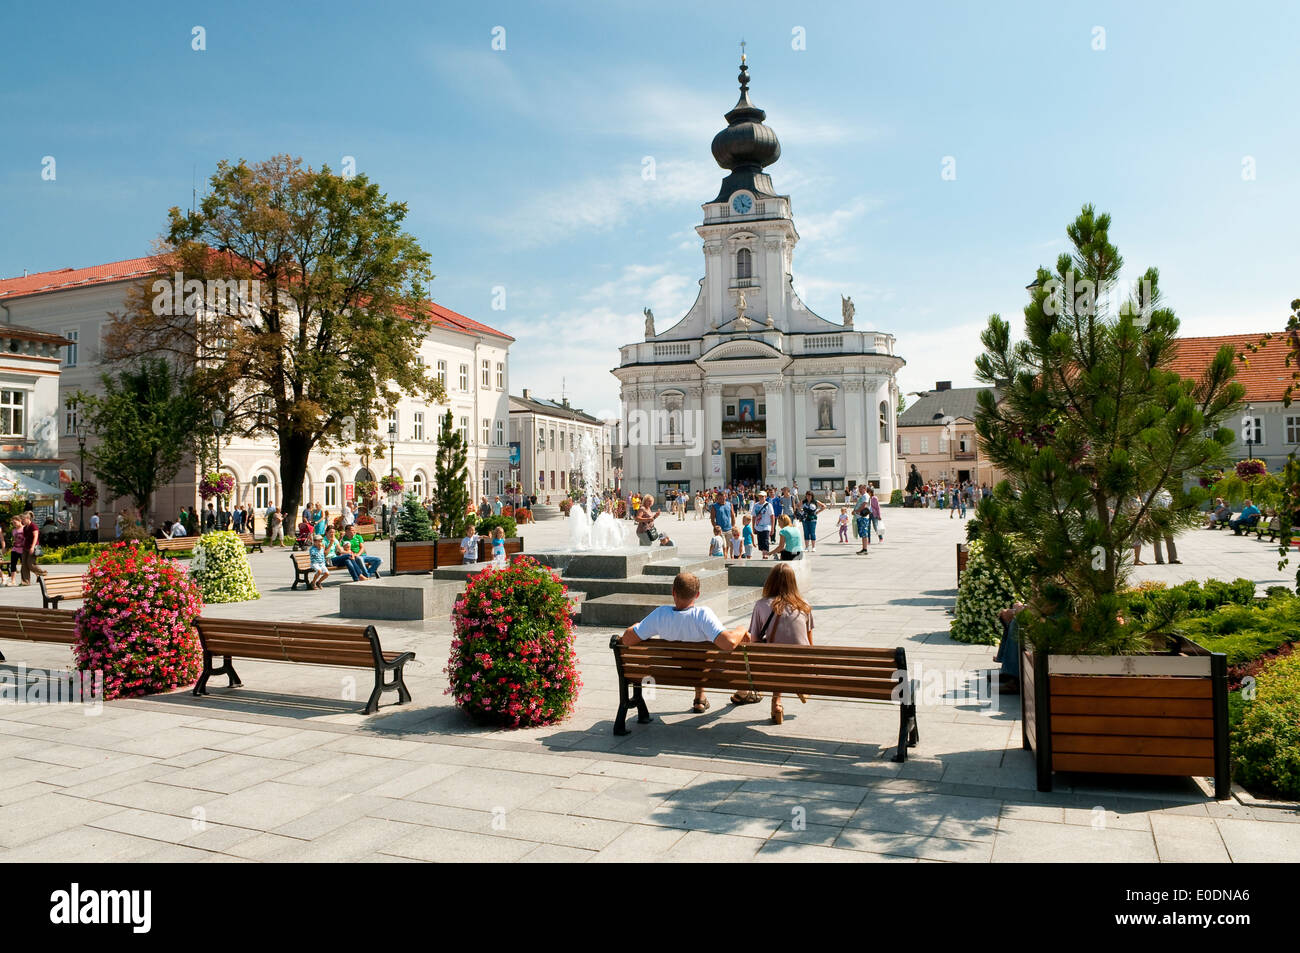 Church in Town Square in Wadowice, Poland. Stock Photo